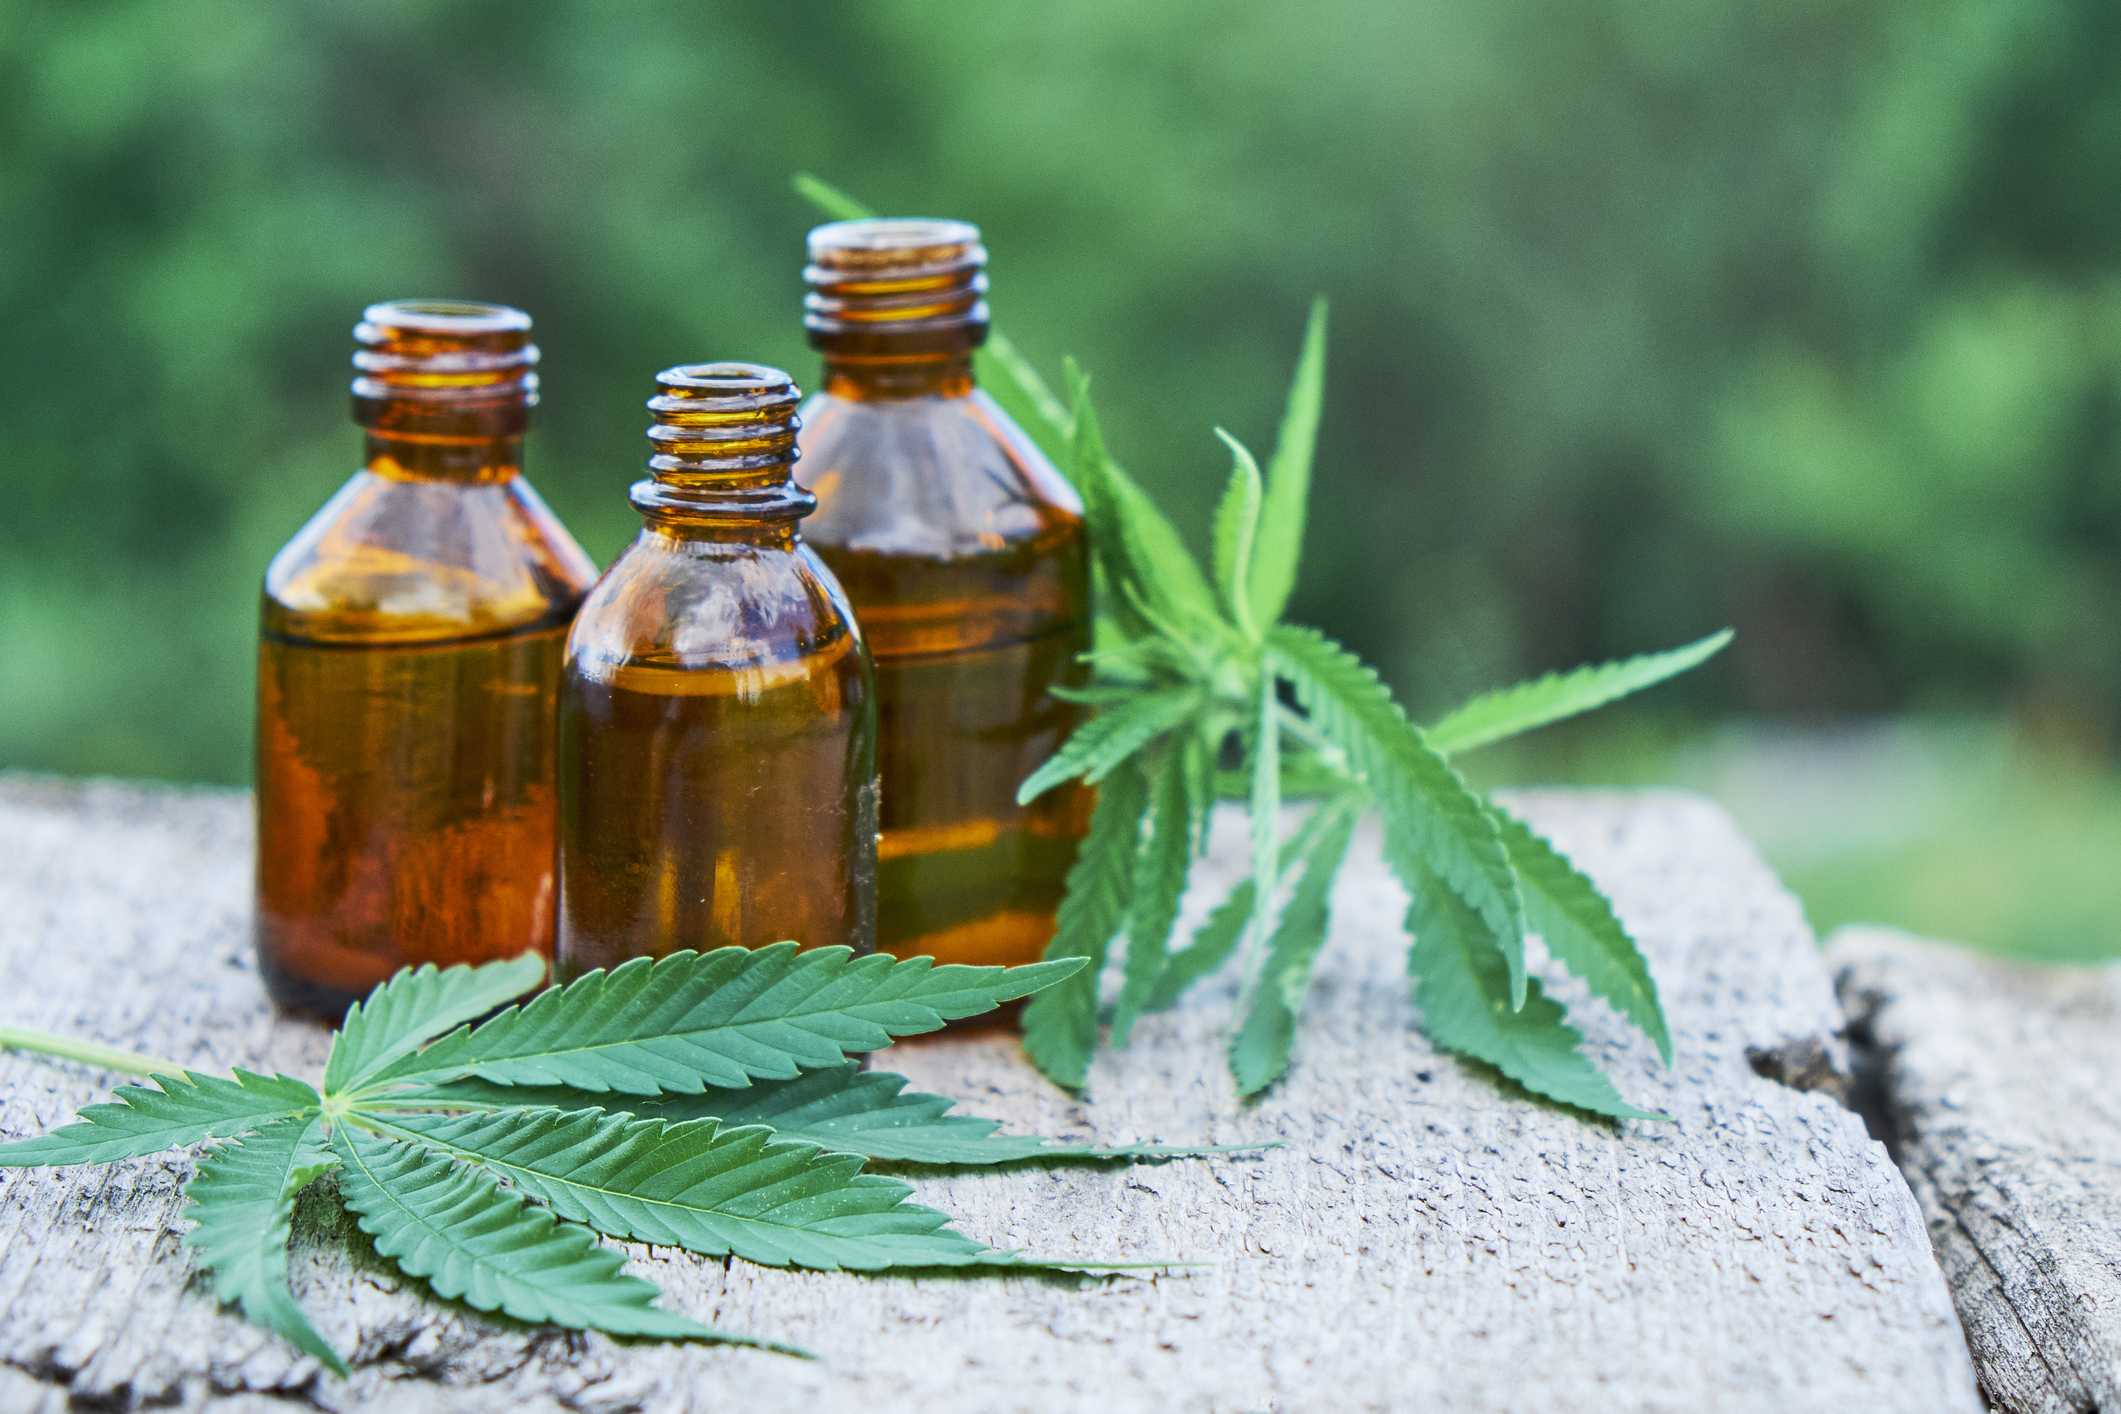 What Is The Best Brand Cbd Oil - Cbd|Oil|Cannabidiol|Products|View|Abstract|Effects|Hemp|Cannabis|Product|Thc|Pain|People|Health|Body|Plant|Cannabinoids|Medications|Oils|Drug|Benefits|System|Study|Marijuana|Anxiety|Side|Research|Effect|Liver|Quality|Treatment|Studies|Epilepsy|Symptoms|Gummies|Compounds|Dose|Time|Inflammation|Bottle|Cbd Oil|View Abstract|Side Effects|Cbd Products|Endocannabinoid System|Multiple Sclerosis|Cbd Oils|Cbd Gummies|Cannabis Plant|Hemp Oil|Cbd Product|Hemp Plant|United States|Cytochrome P450|Many People|Chronic Pain|Nuleaf Naturals|Royal Cbd|Full-Spectrum Cbd Oil|Drug Administration|Cbd Oil Products|Medical Marijuana|Drug Test|Heavy Metals|Clinical Trial|Clinical Trials|Cbd Oil Side|Rating Highlights|Wide Variety|Animal Studies